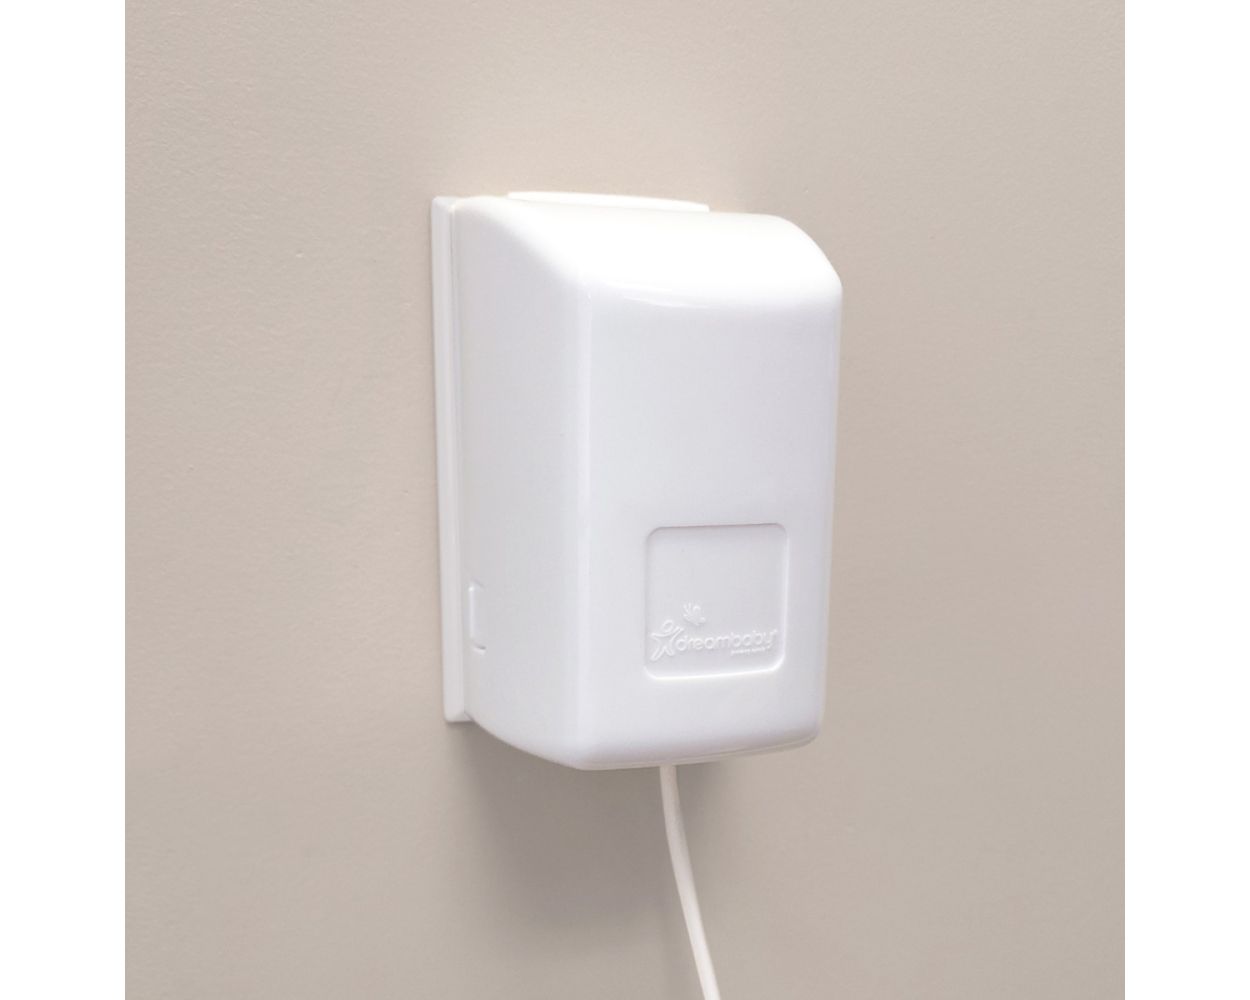 EZY-FIT Plug & Electrical Outlet Cover - 2PK